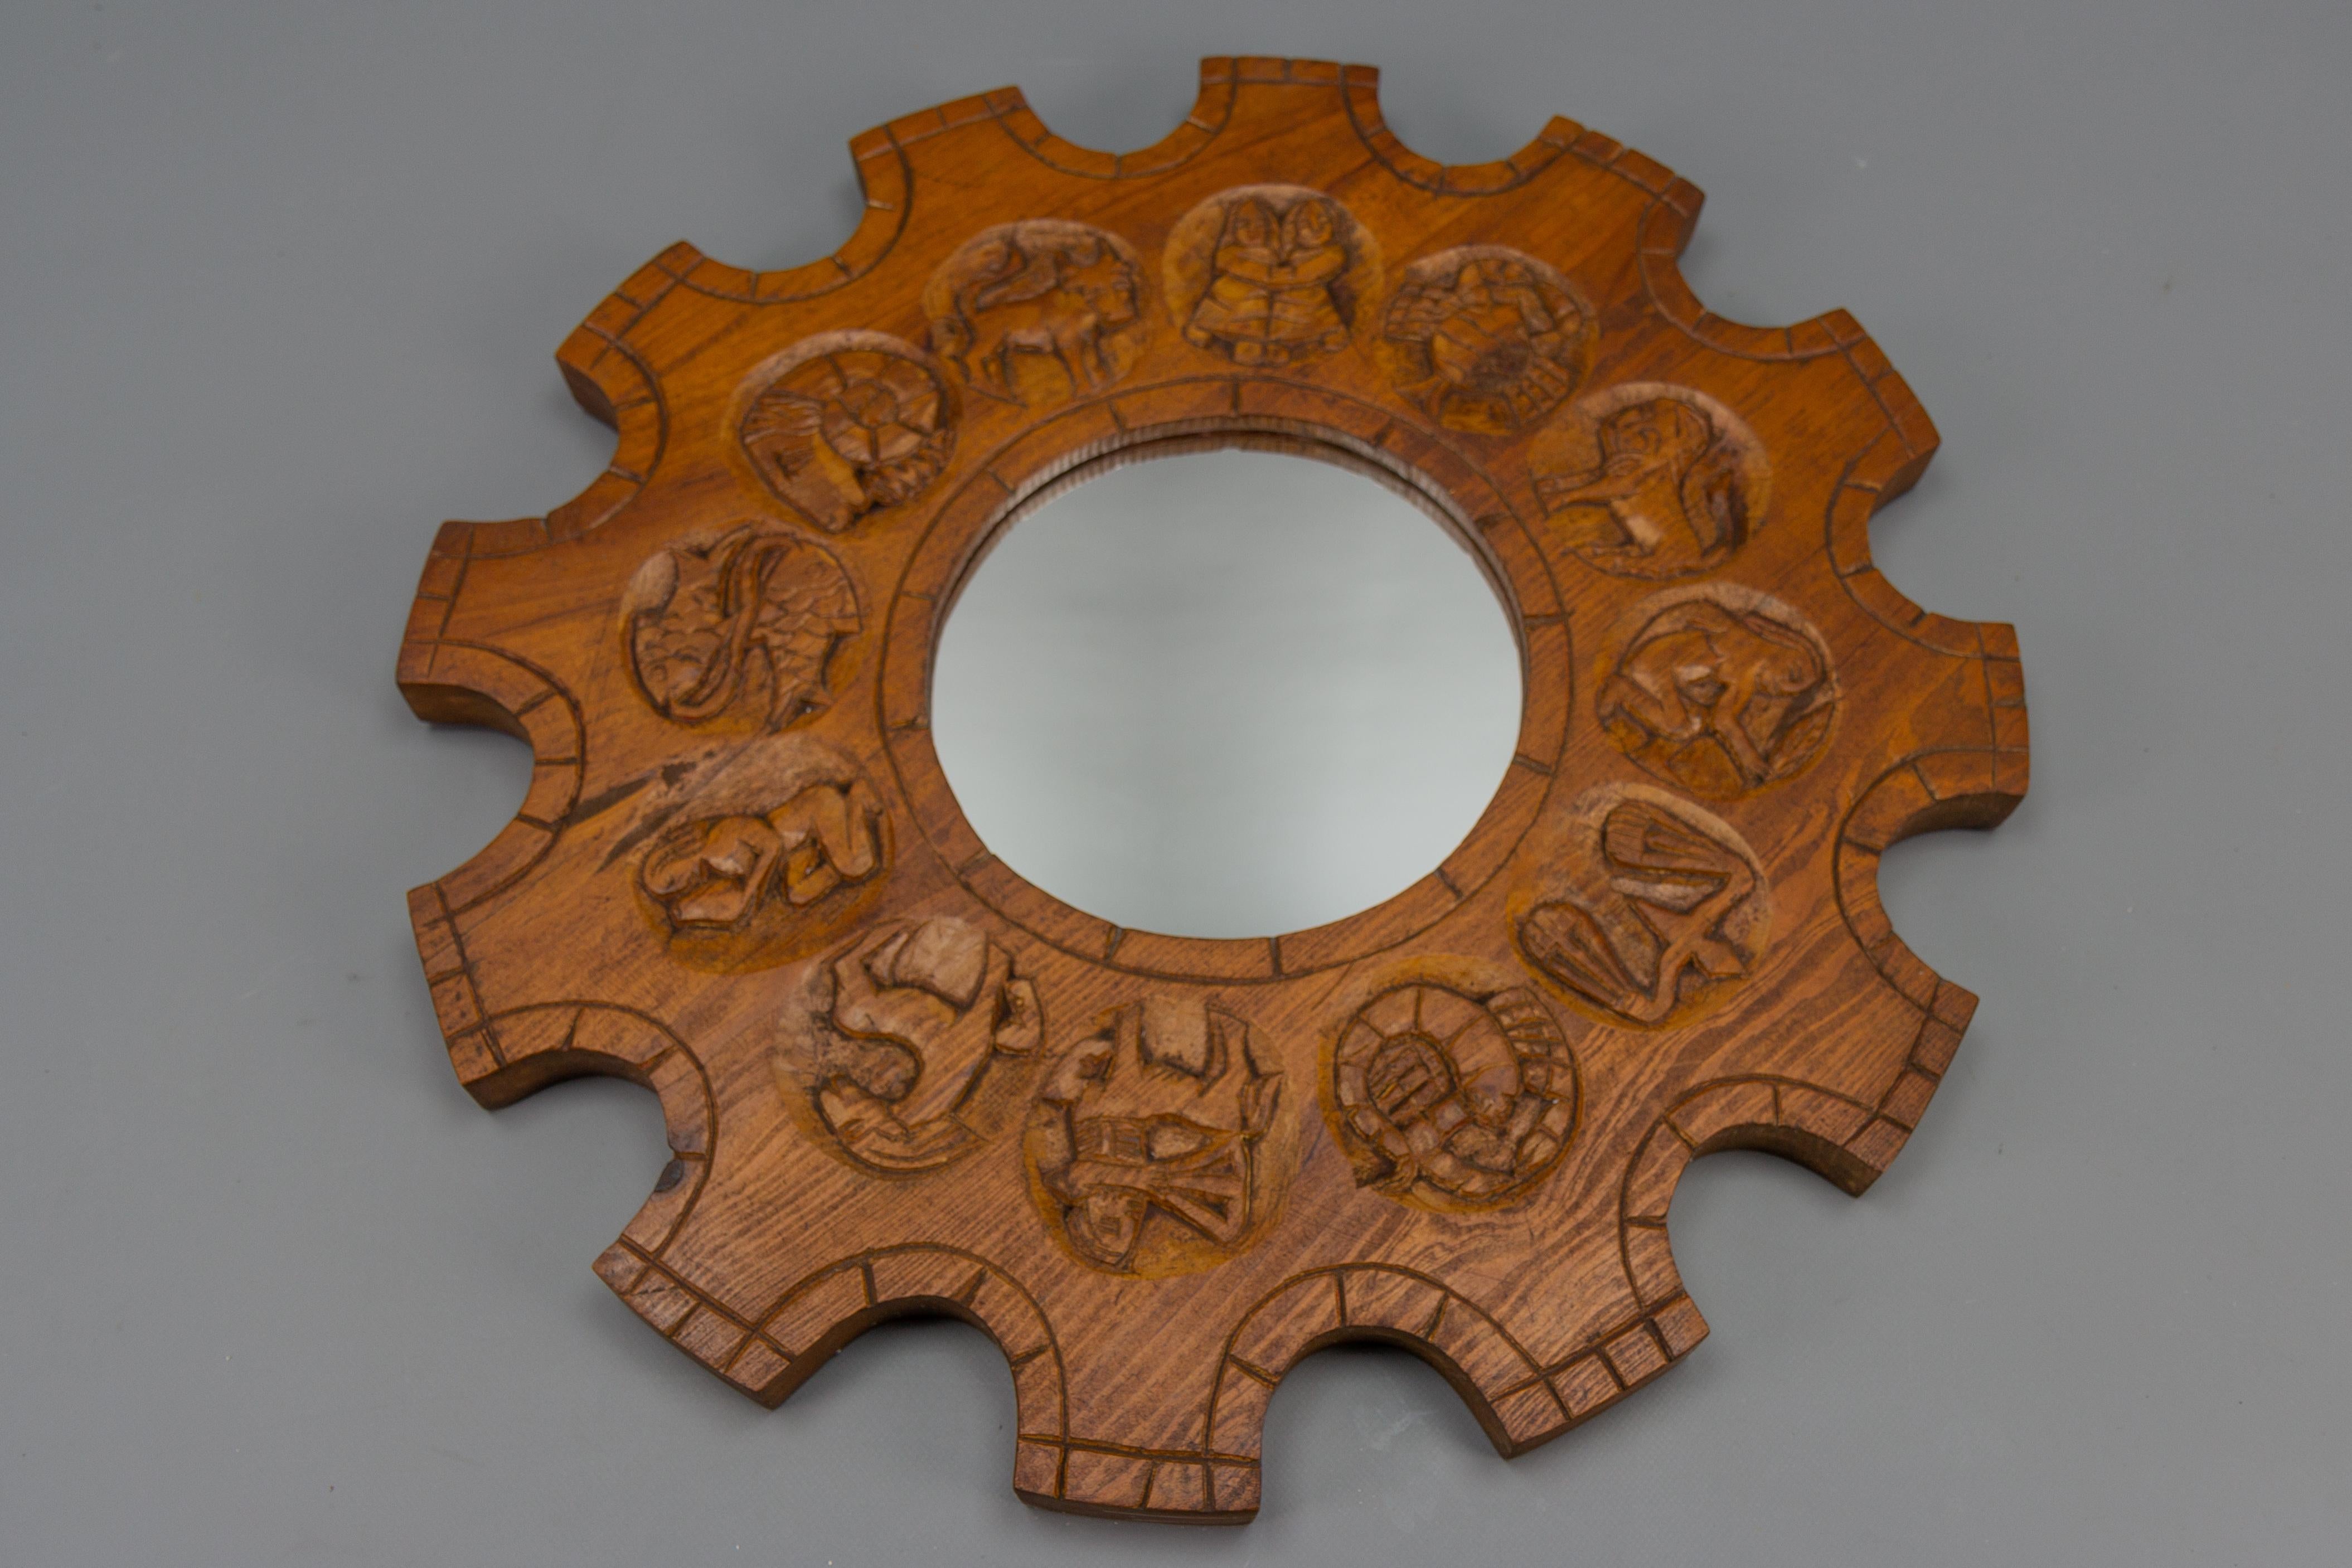 Mid-Century Modern carved pine-wood sunburst-shaped wall mirror with Zodiac signs, Germany, ca 1970s.
This massive vintage round wall mirror features a pine-wood frame with hand-carved Zodiac signs.
Dimensions: depth: circa 3.5 cm / 1.37 in;